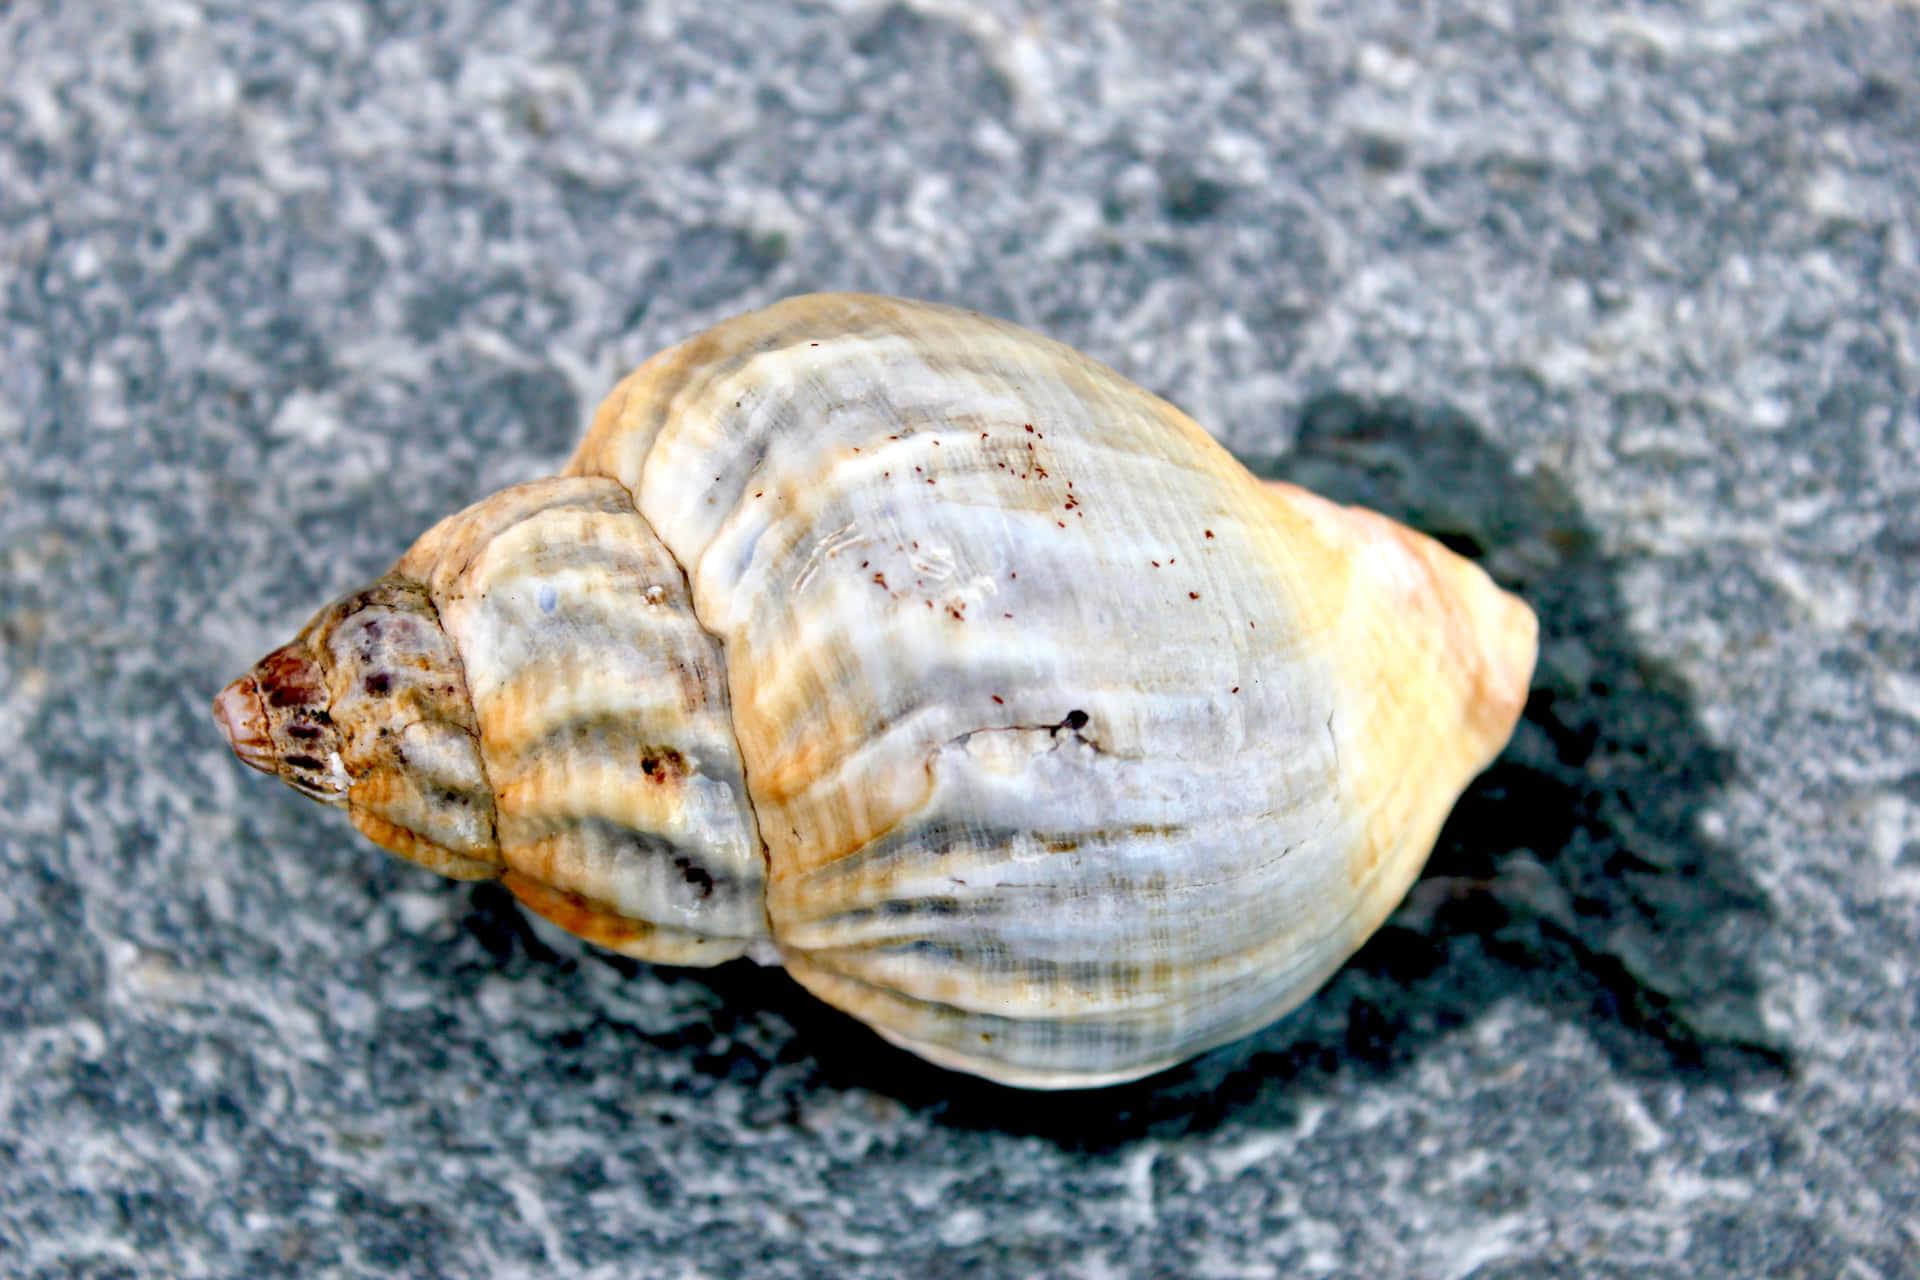 Caption: An Exquisite Whelk Shell On The Turquoise Sea Shore Wallpaper